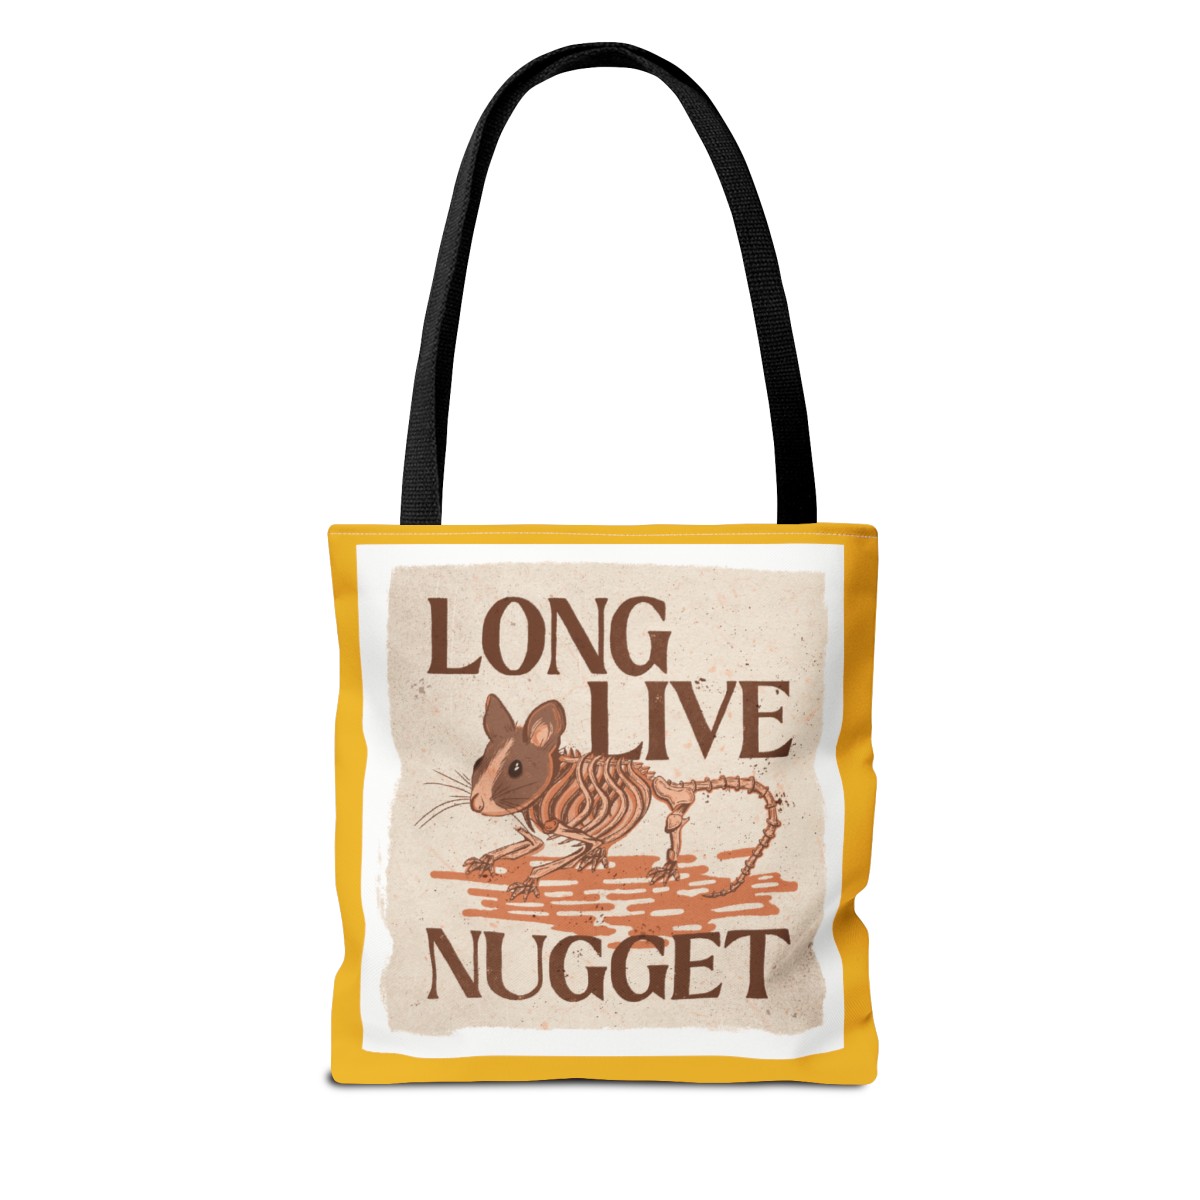 Long Live Nugget Tote Bag inspired by 'Yellowjackets' product thumbnail image